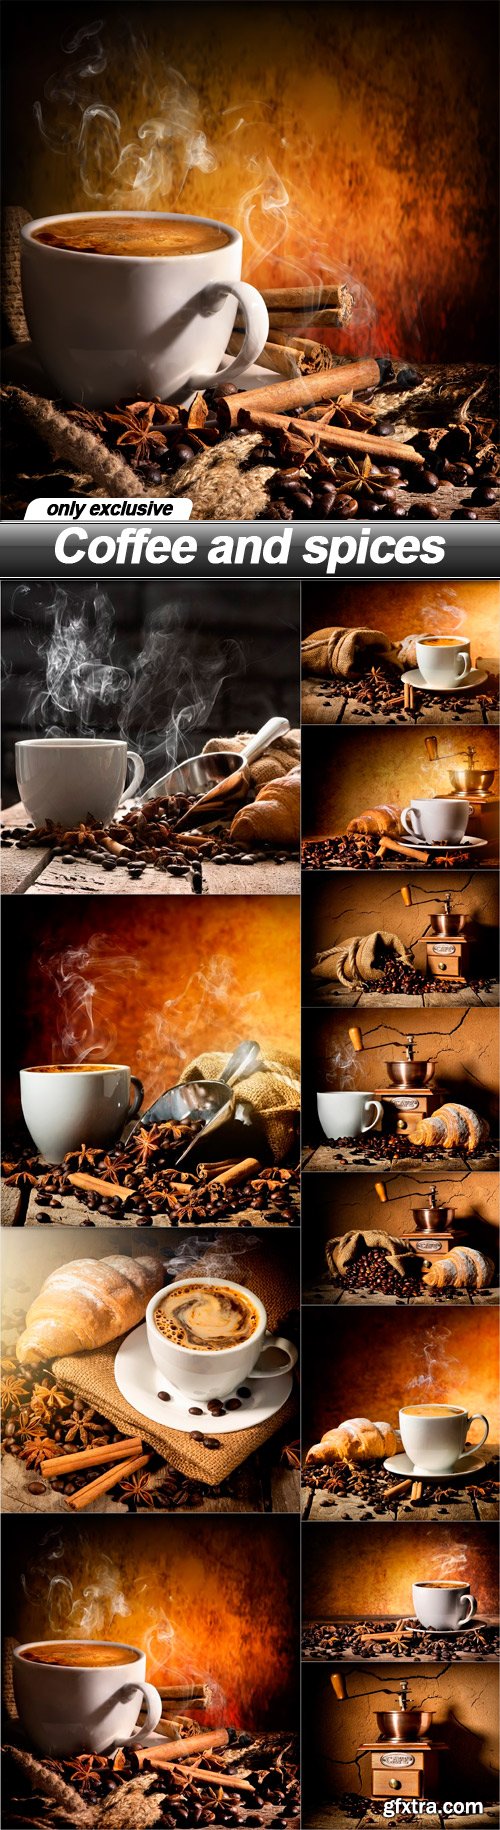 Coffee and spices - 12 UHQ JPEG